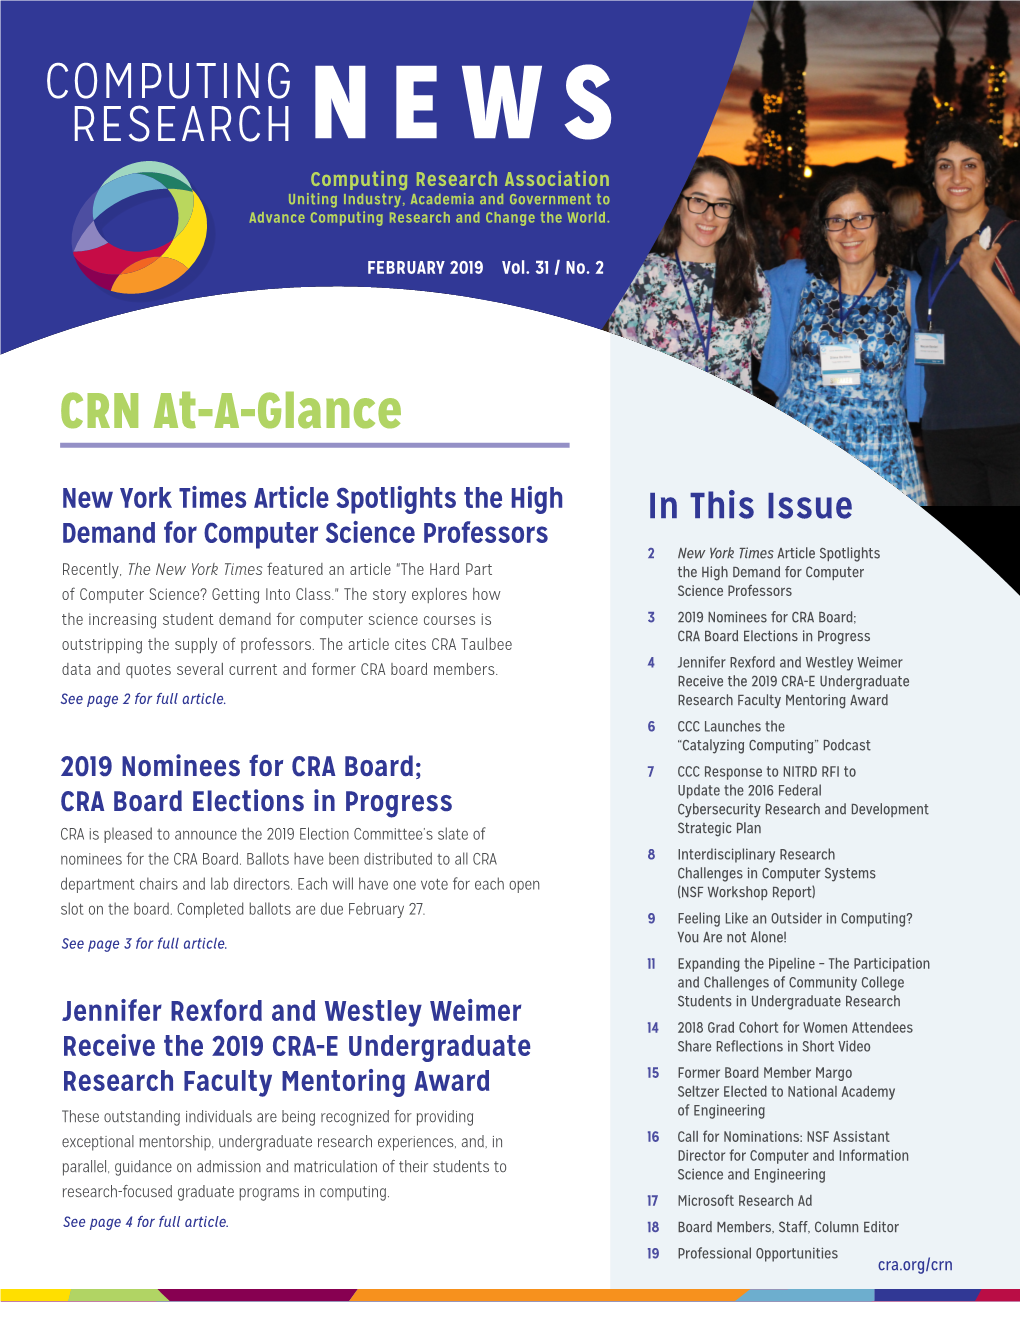 Jennifer Rexford and Westley Weimer Receive the 2019 CRA-E Undergraduate See Page 2 for Full Article